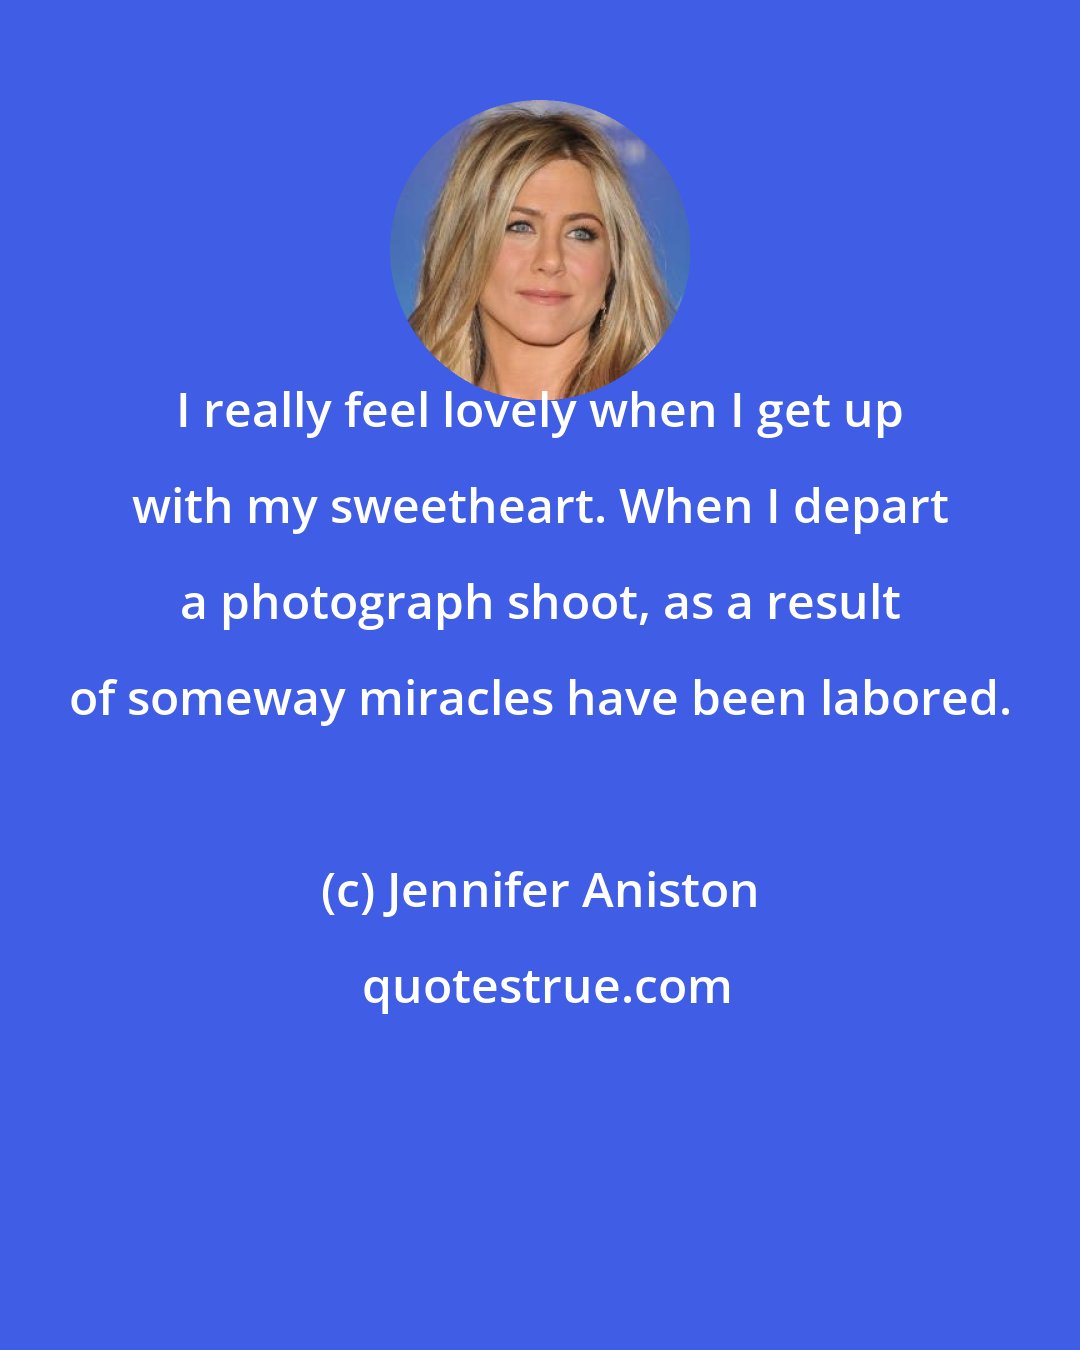 Jennifer Aniston: I really feel lovely when I get up with my sweetheart. When I depart a photograph shoot, as a result of someway miracles have been labored.